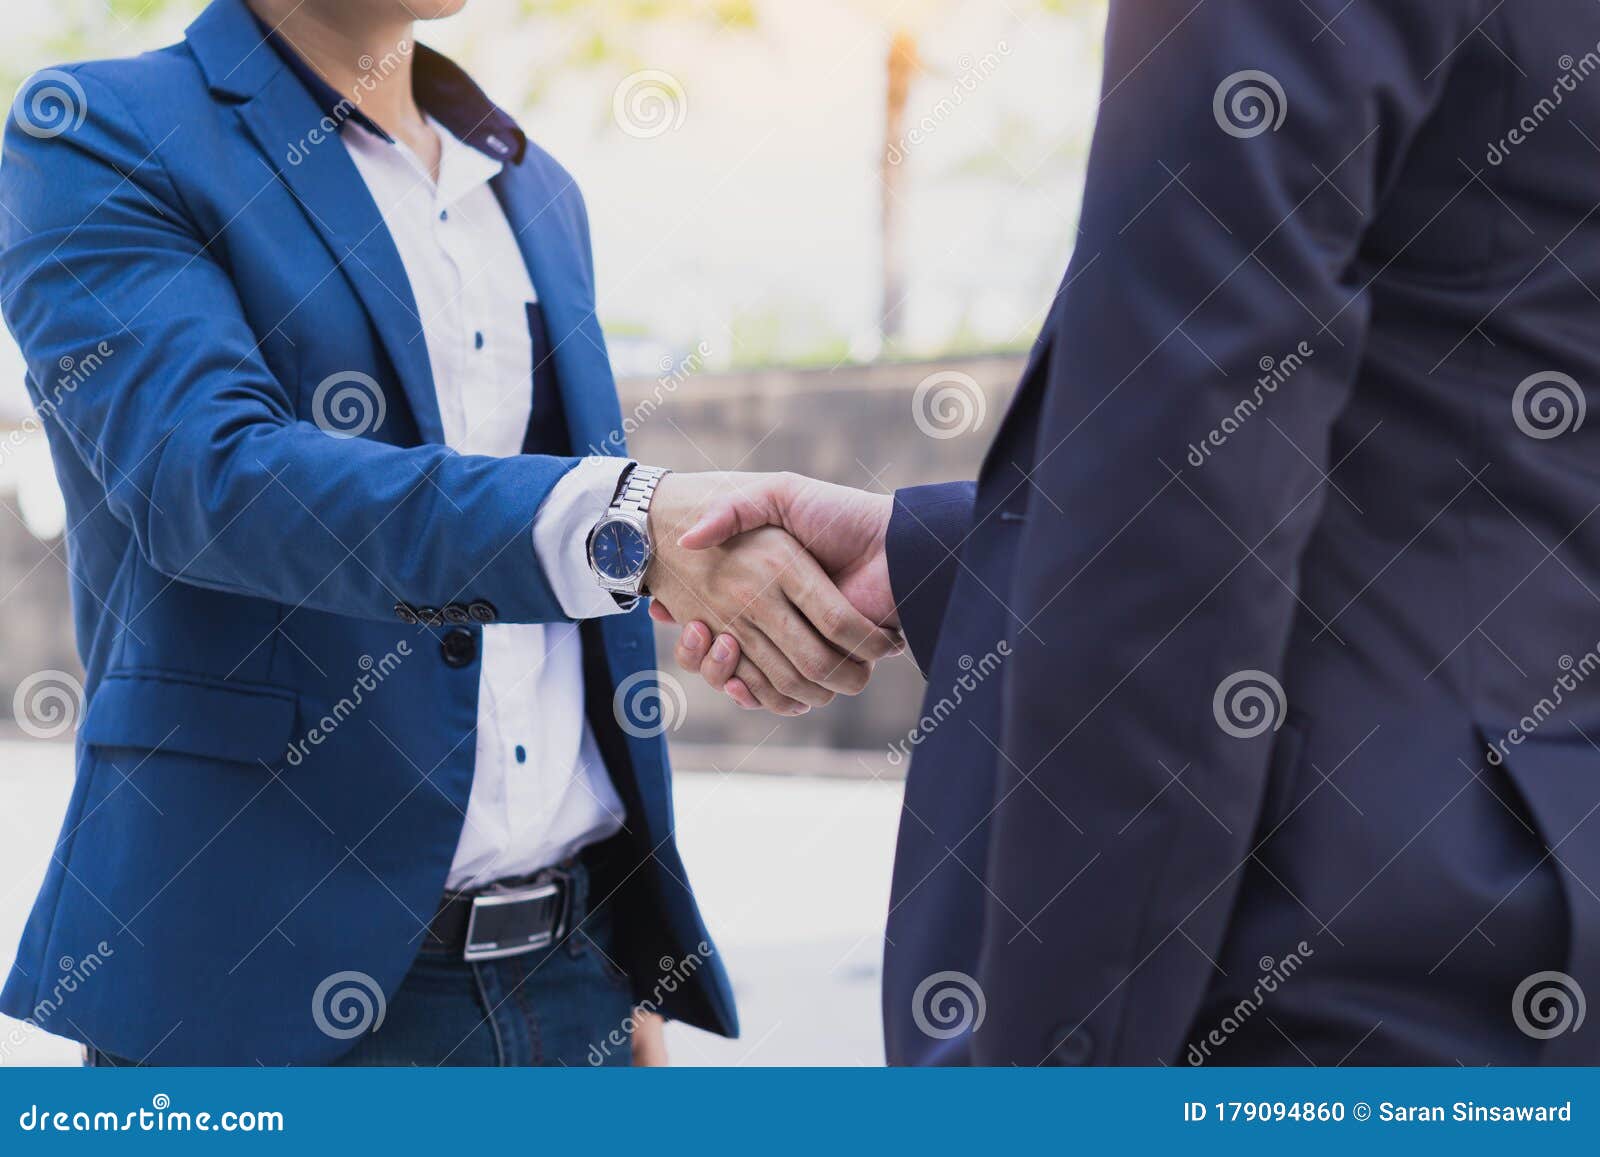 two business man making handshake in the city. business etiquette, congratulation, merger and acquisition 